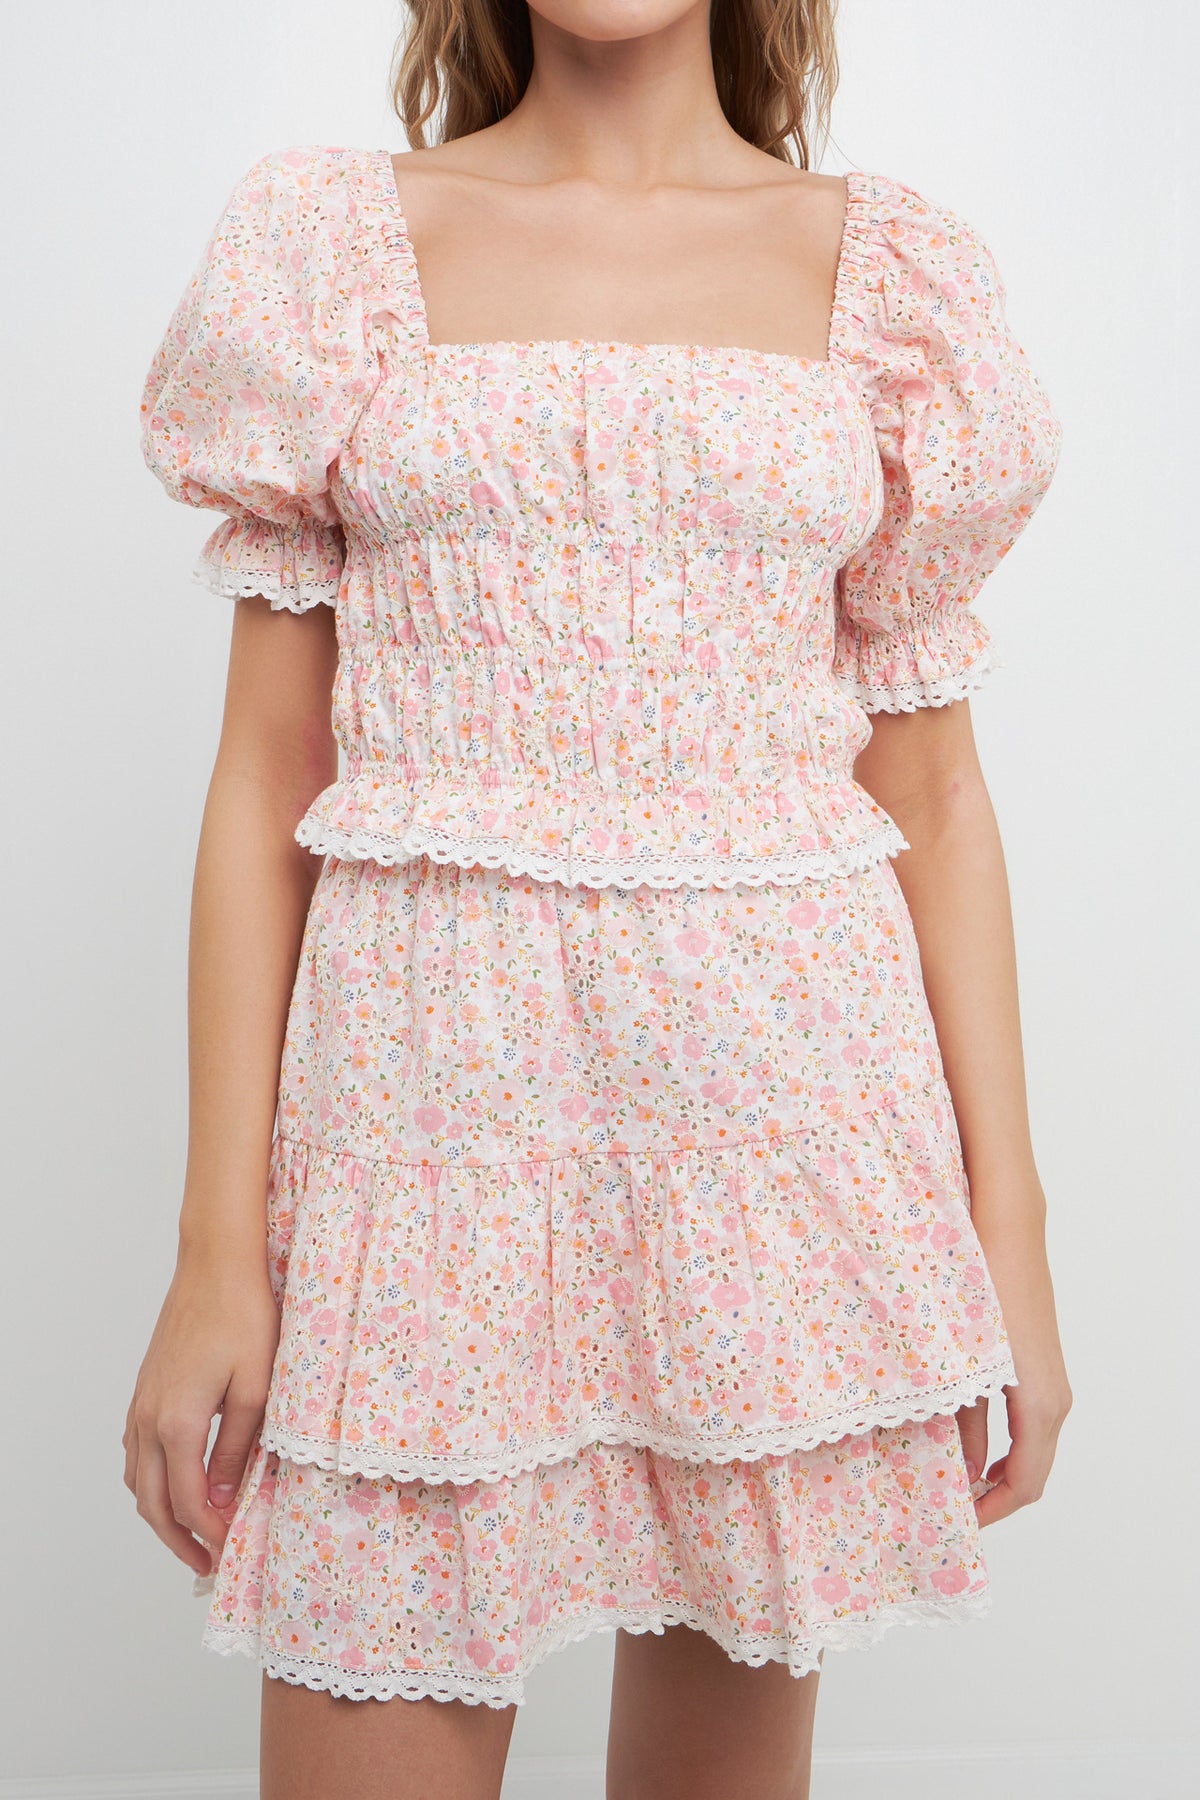 FREE THE ROSES - Floral Eyelet Smocked Cropped Top - TOPS available at Objectrare